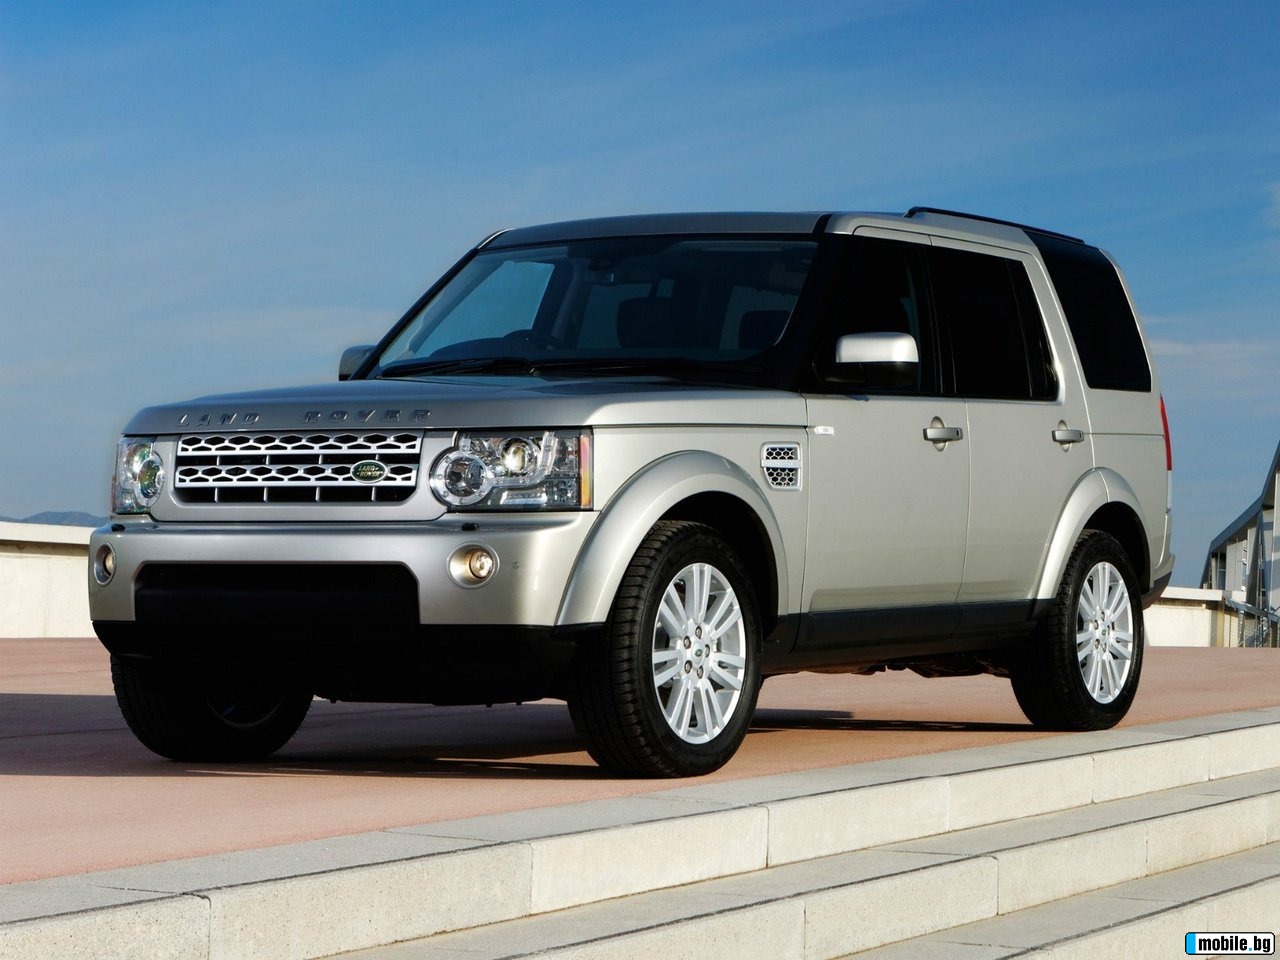 Land Rover Discovery IV, 3.0d | Mobile.bg   1